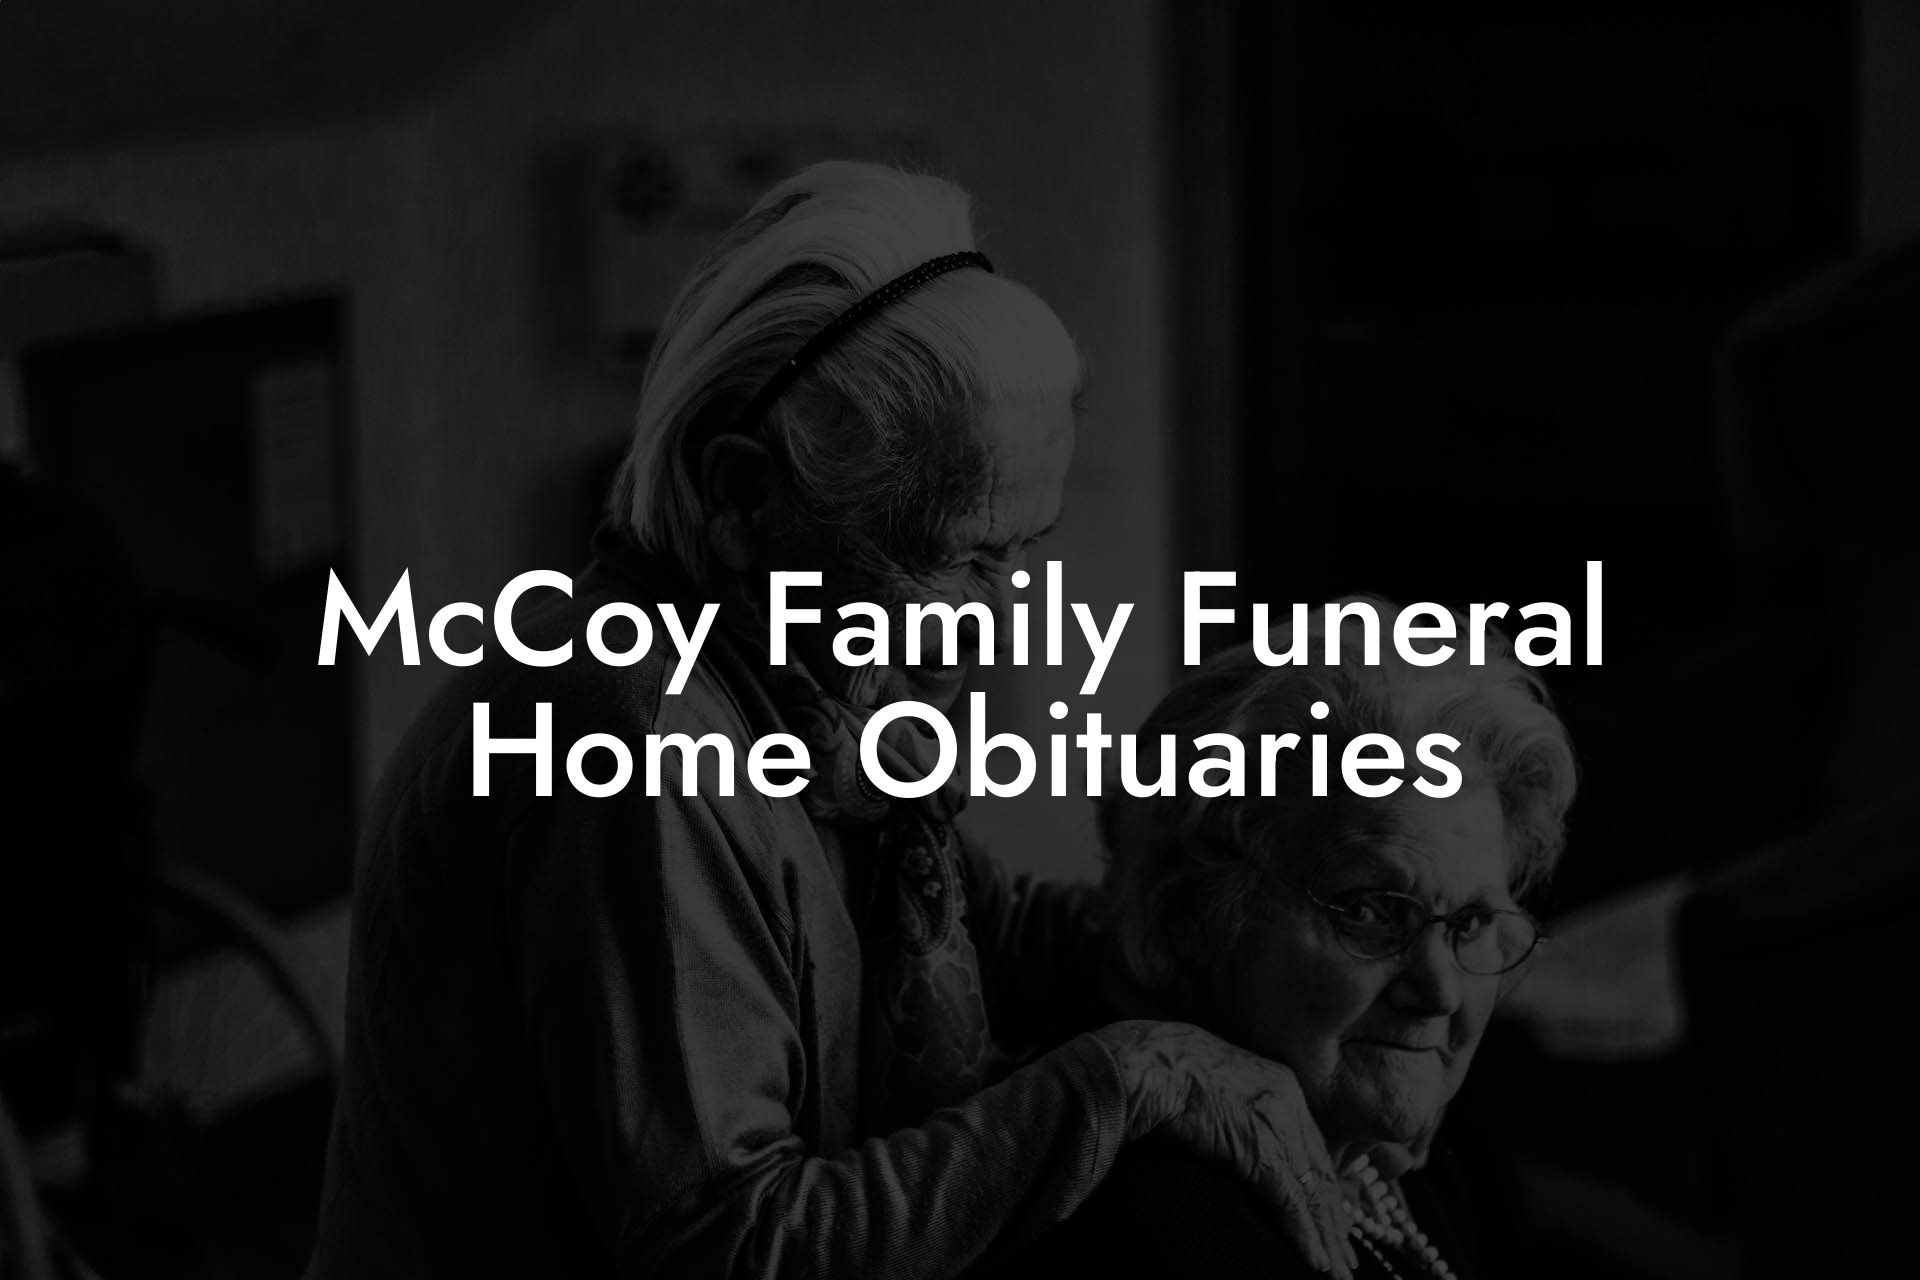 McCoy Family Funeral Home Obituaries